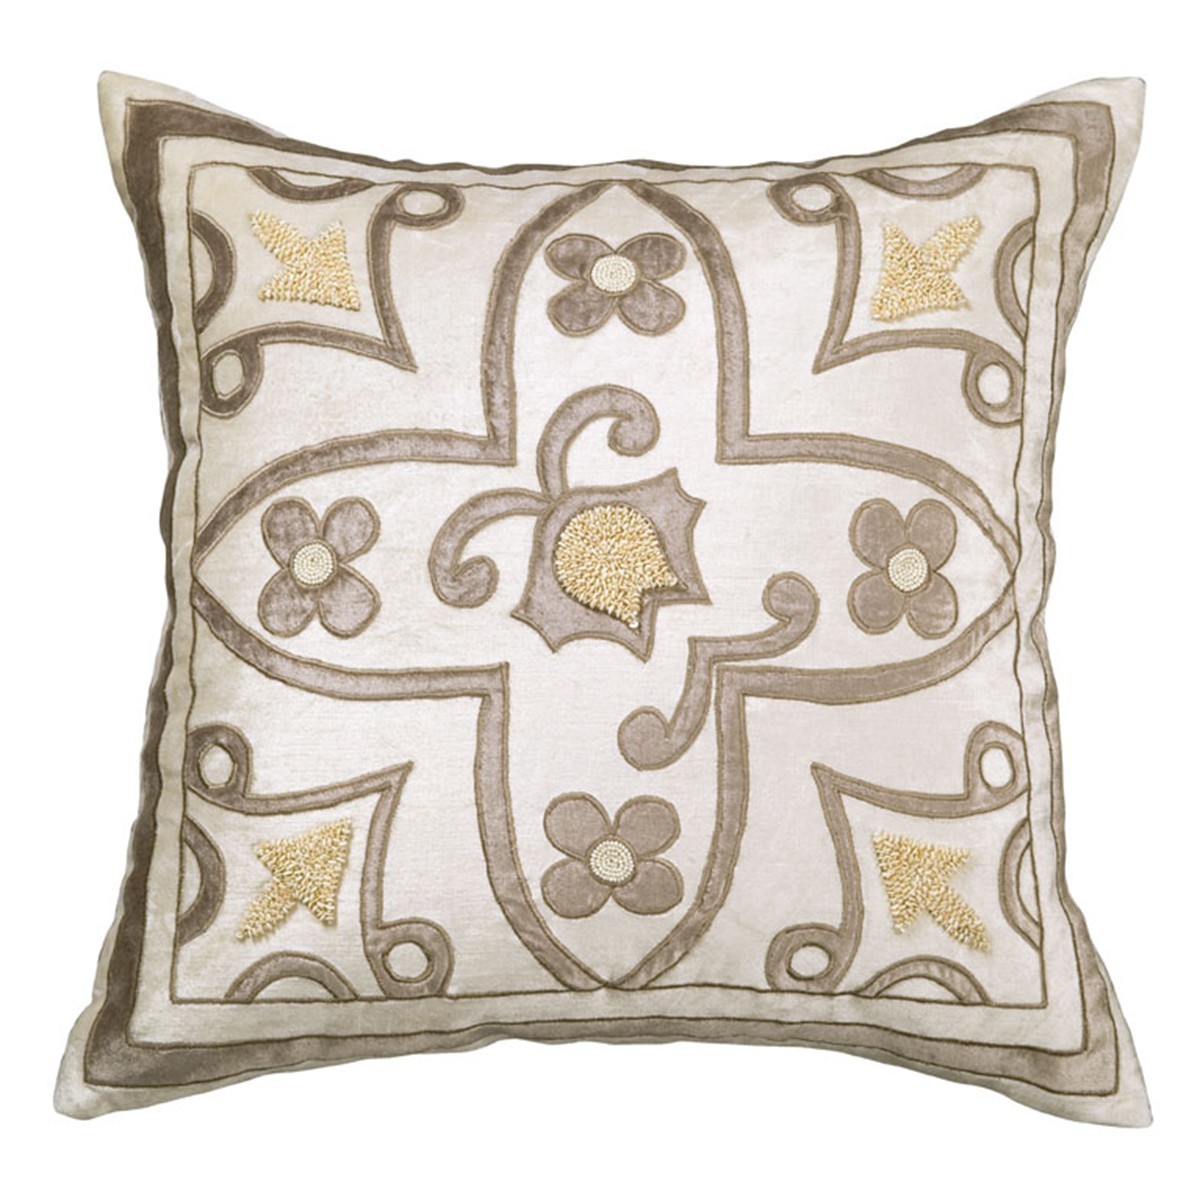 *Lili Alessandra Accents with Pearls Decorative Pillows